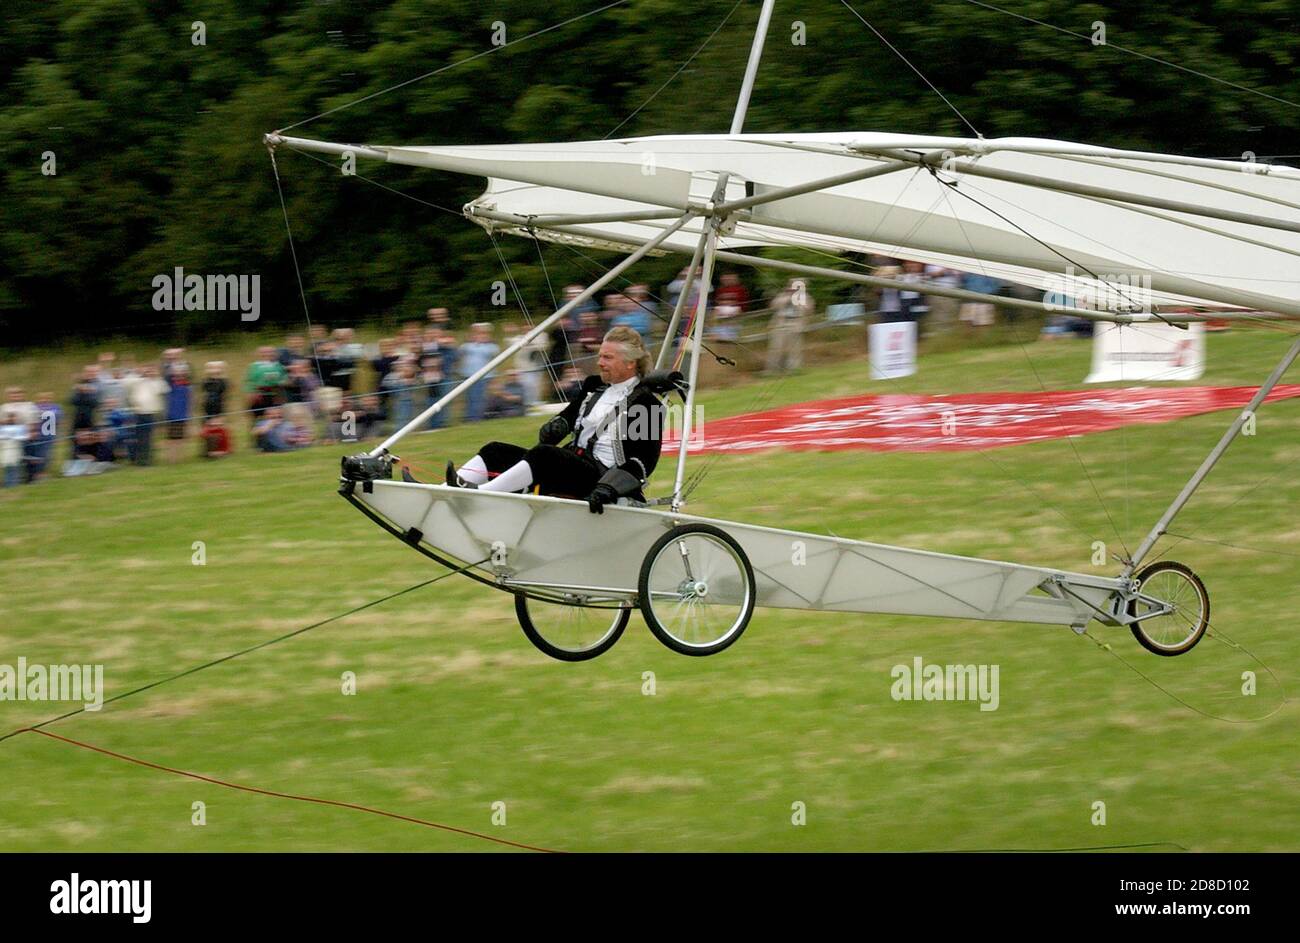 Richard Branson recreates the flight of Sir George Cayley's glider, in a replica, at Brompton, Near Scarborough, North Yorkshire. Photo by Andrew Higg Stock Photo